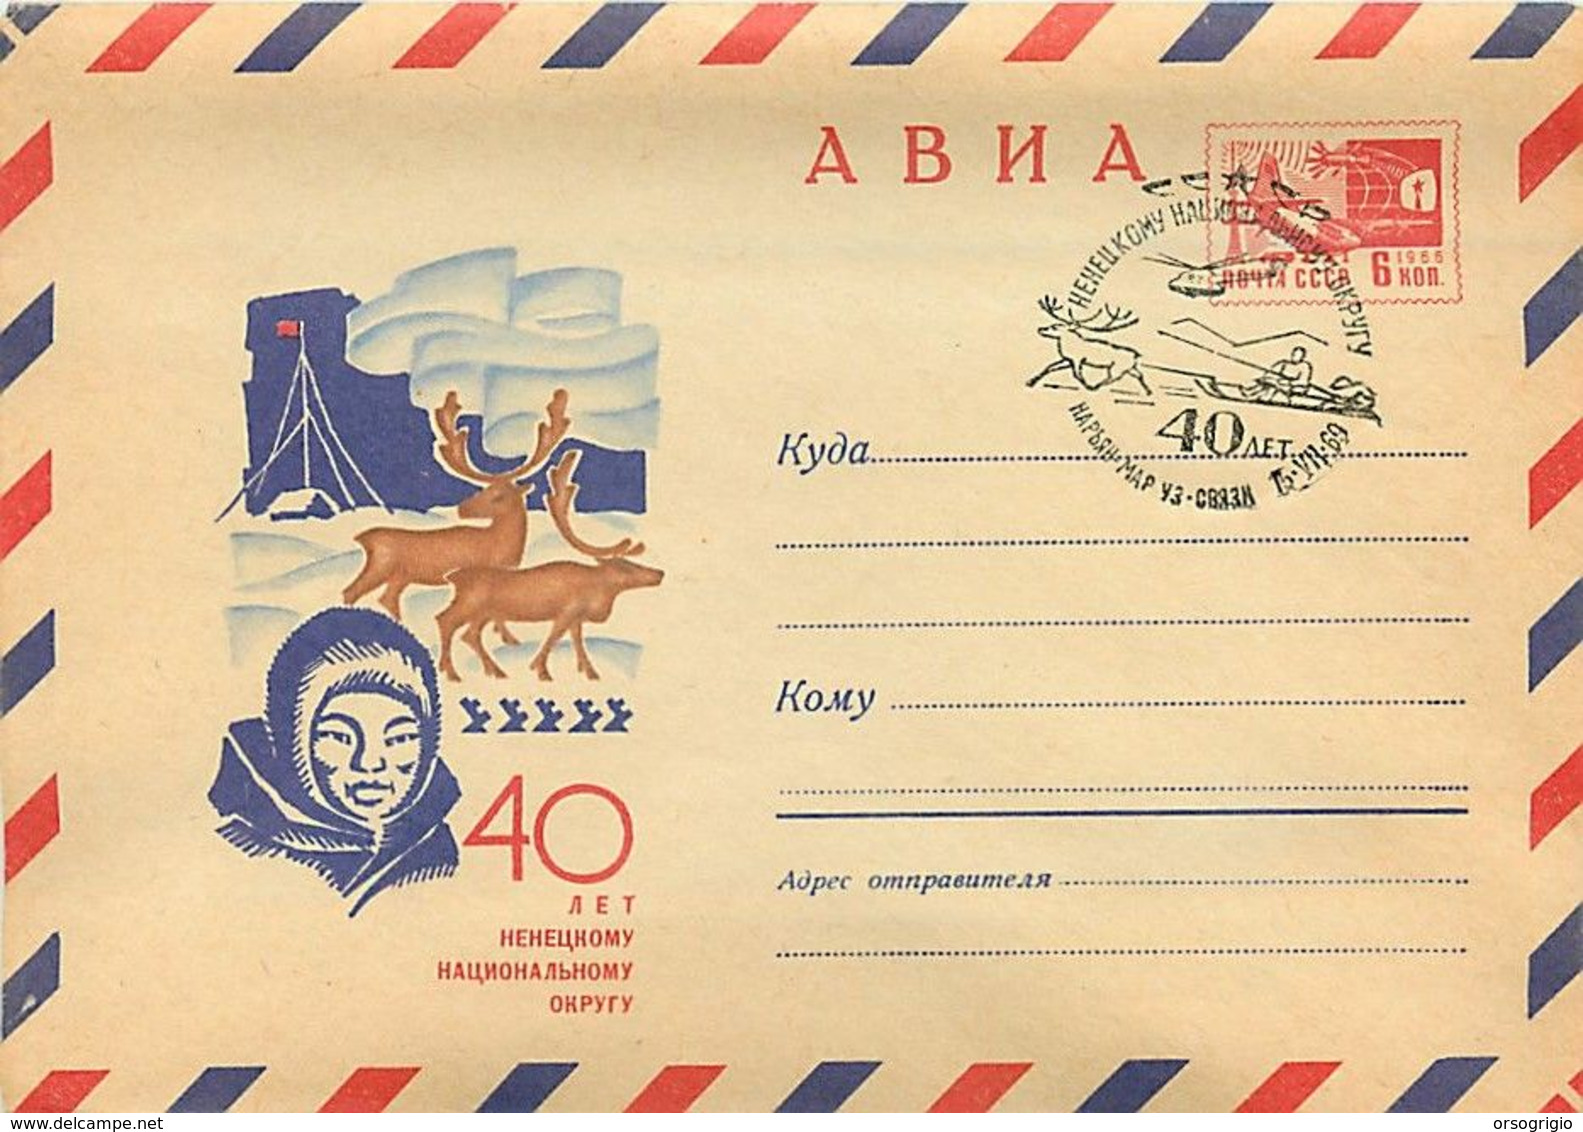 RUSSIA - Intero Postale -SLITTA - ELICOTTERO - Other Means Of Transport